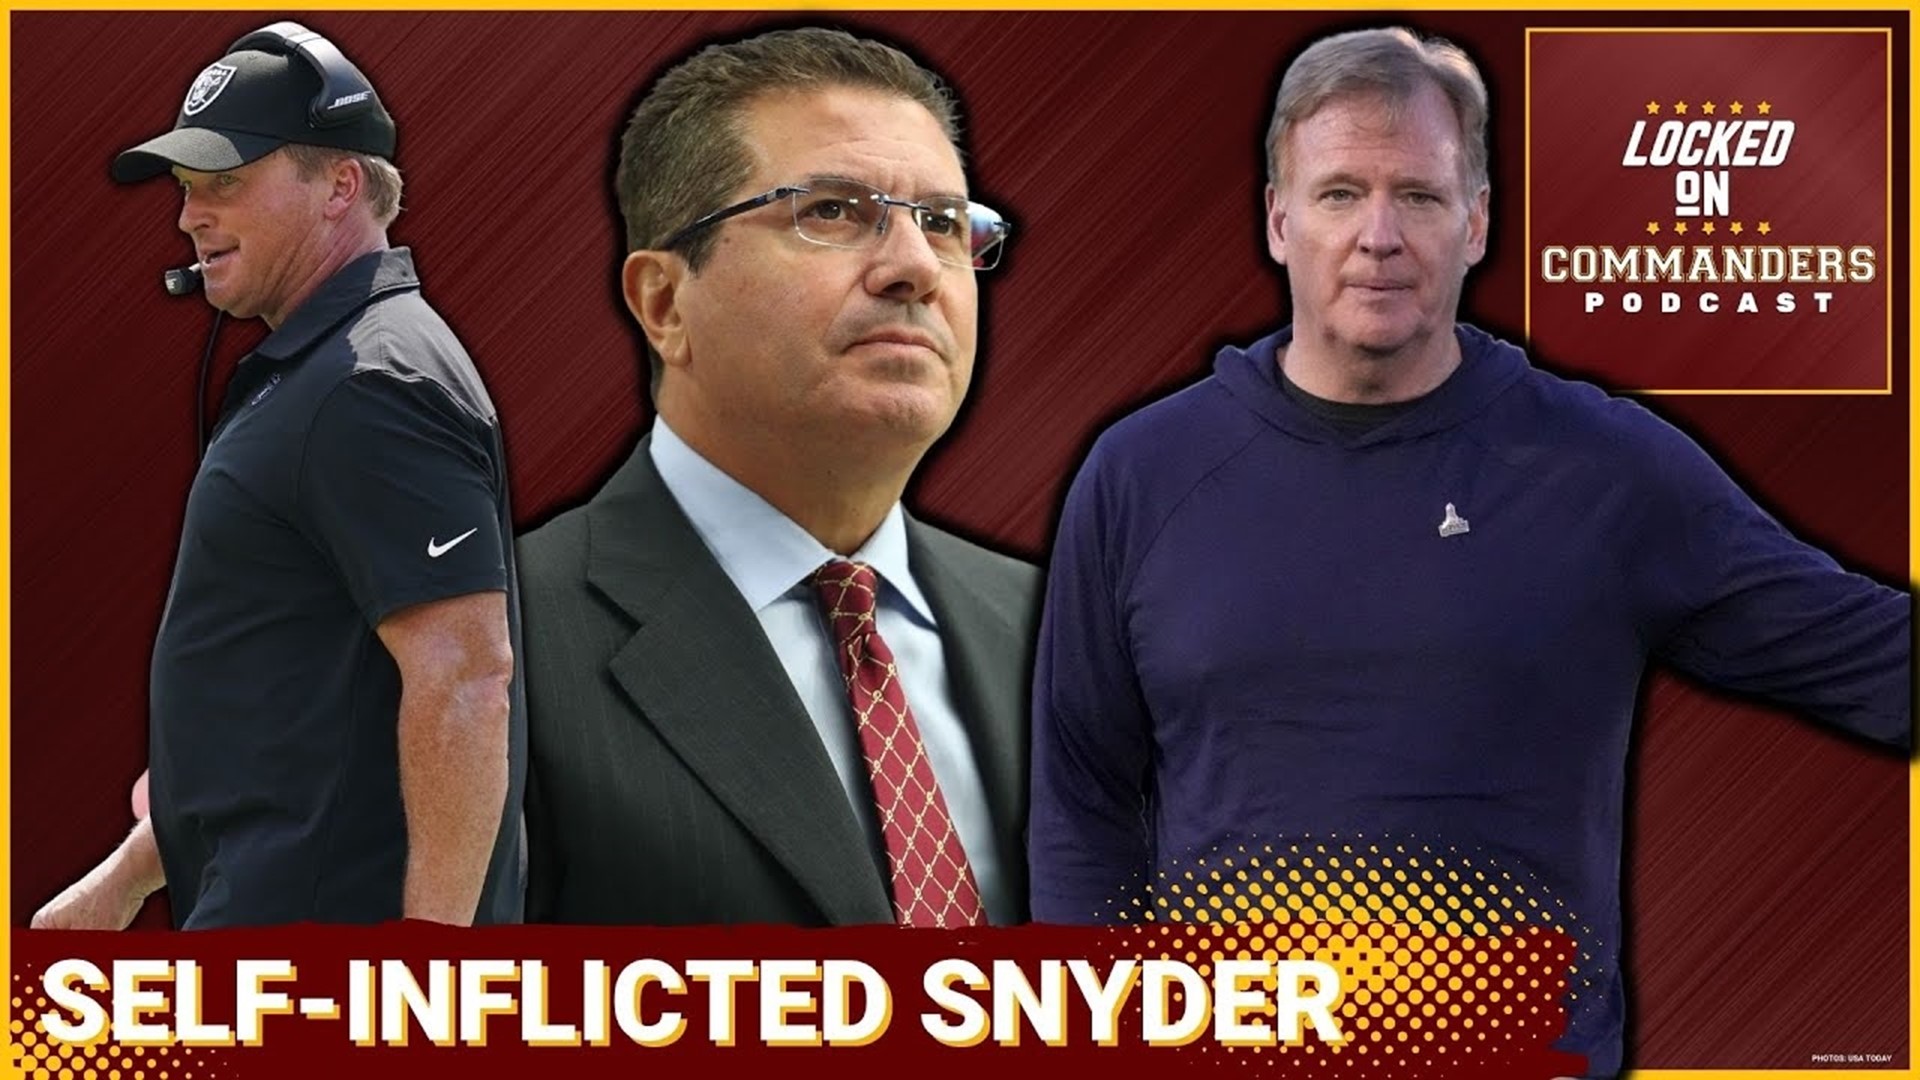 snyder selling the commanders